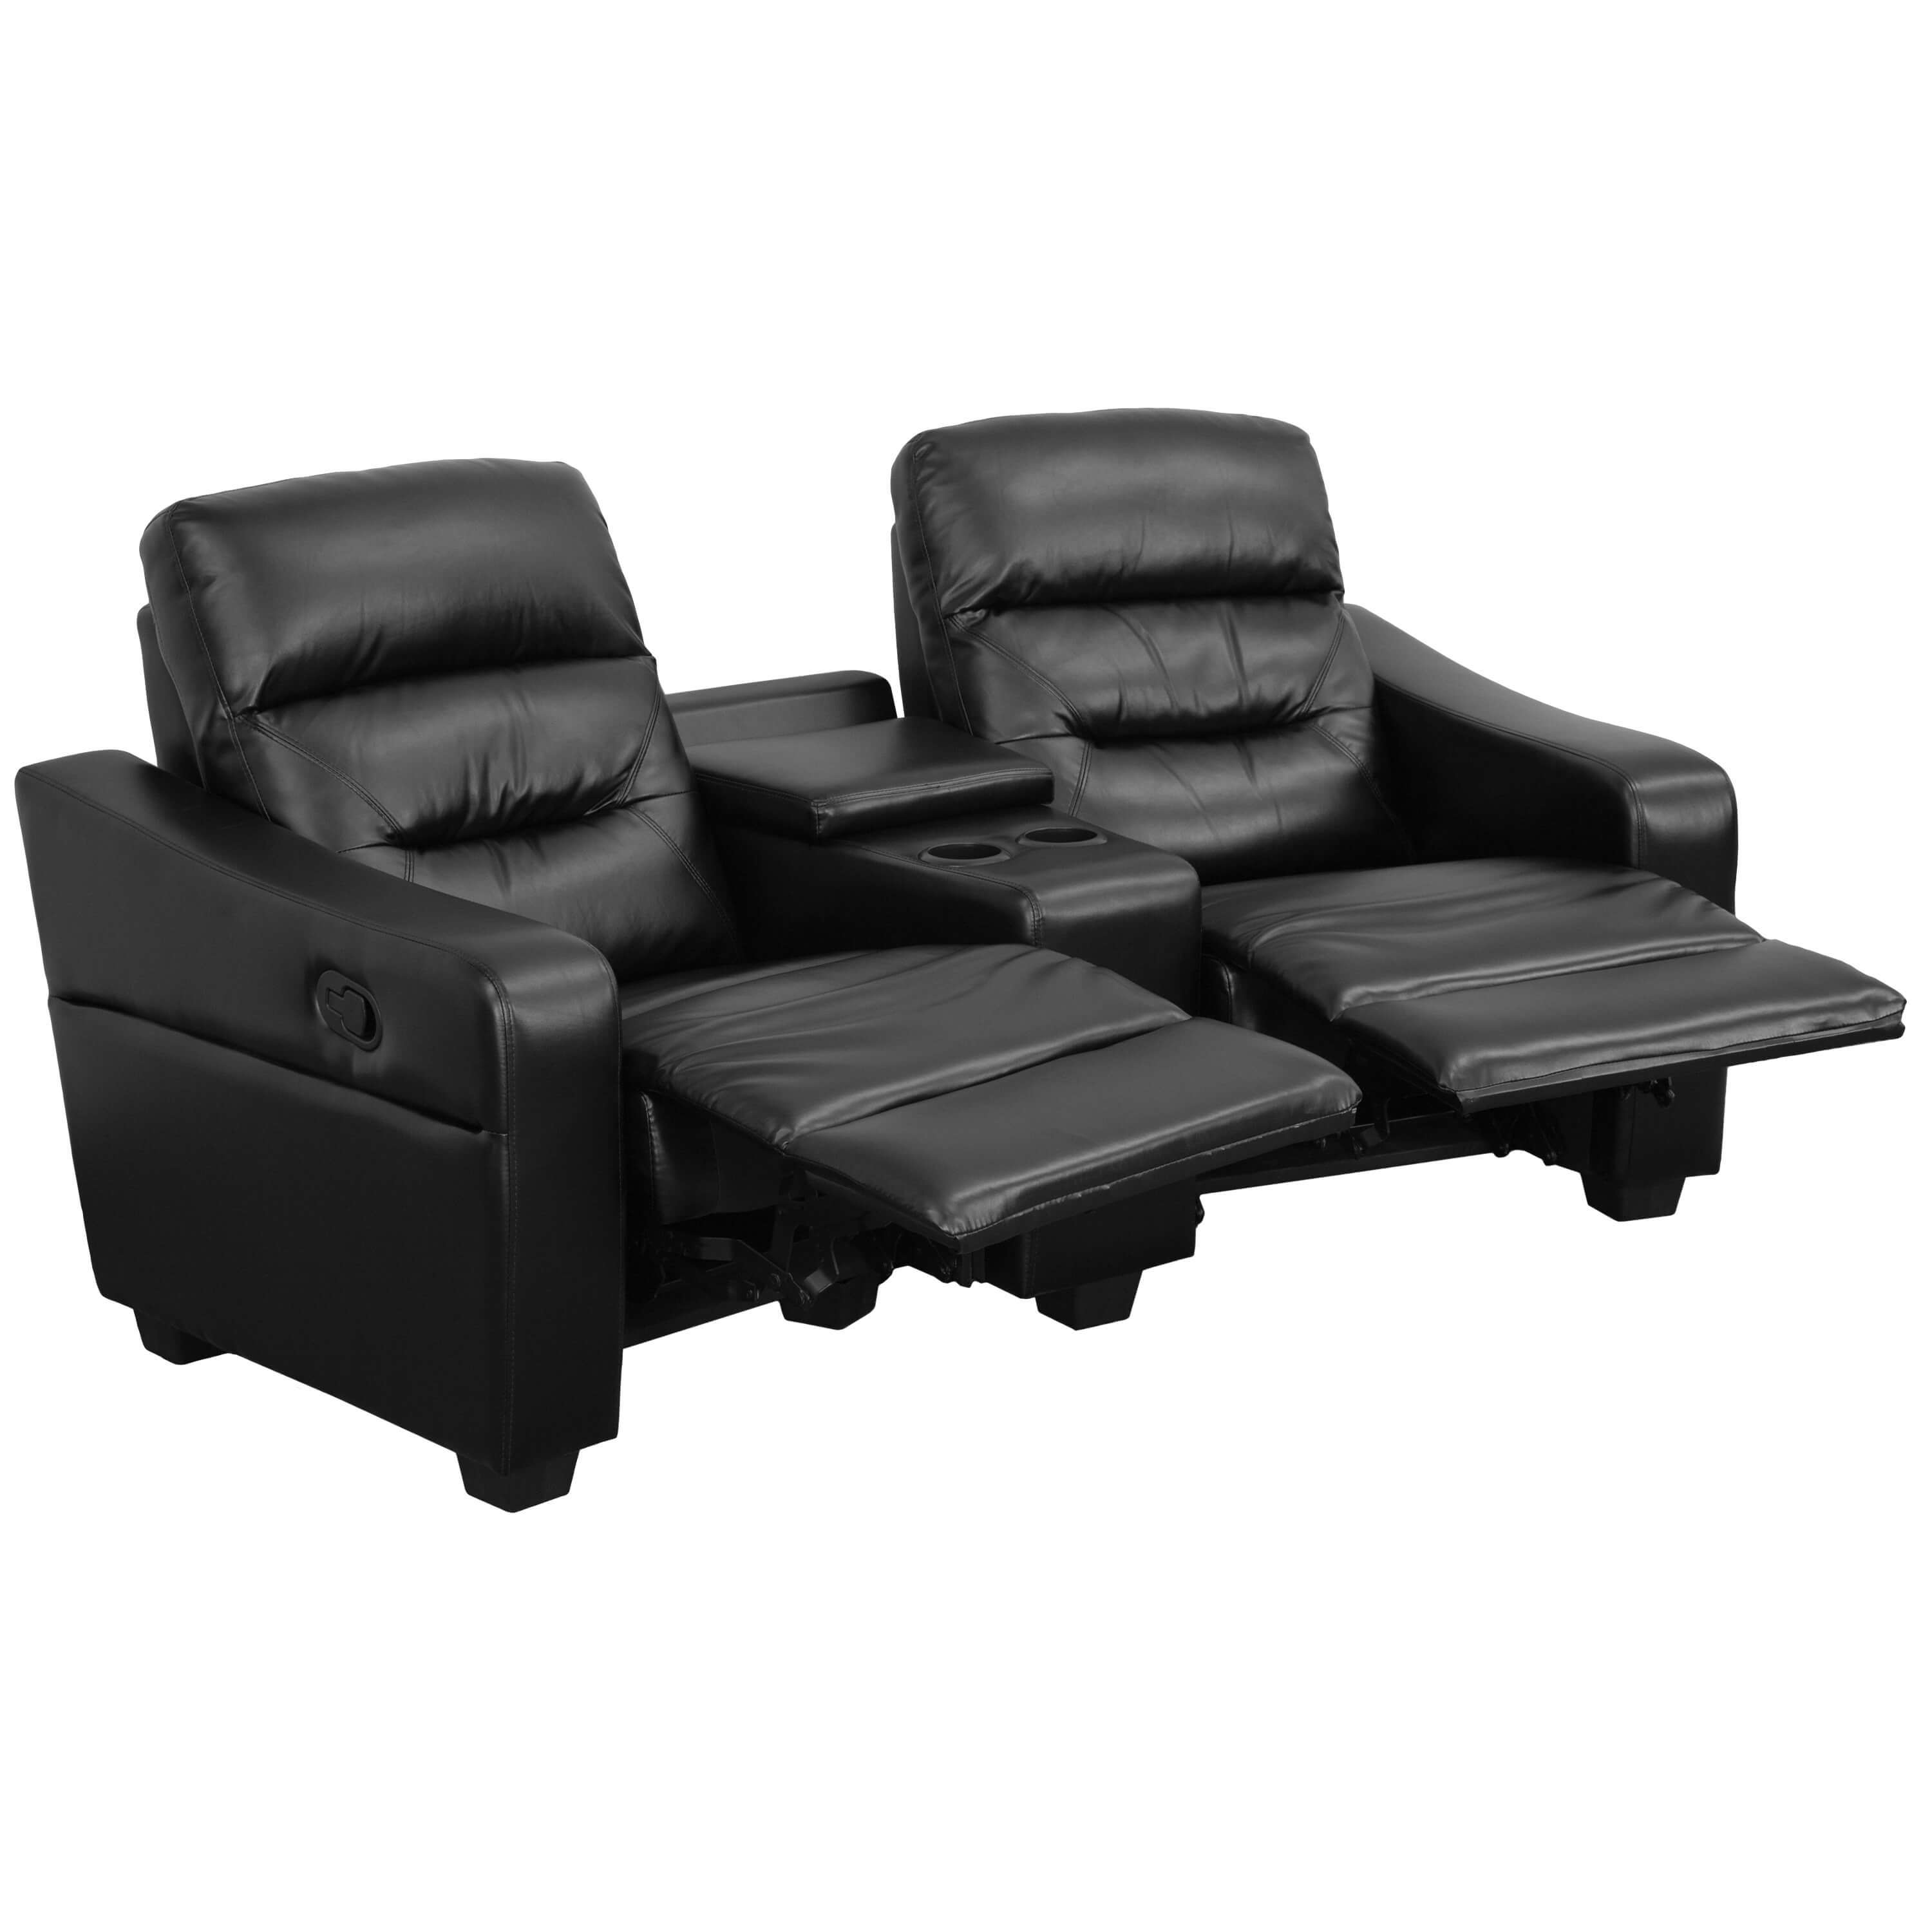 Theatre seating couch reclined view